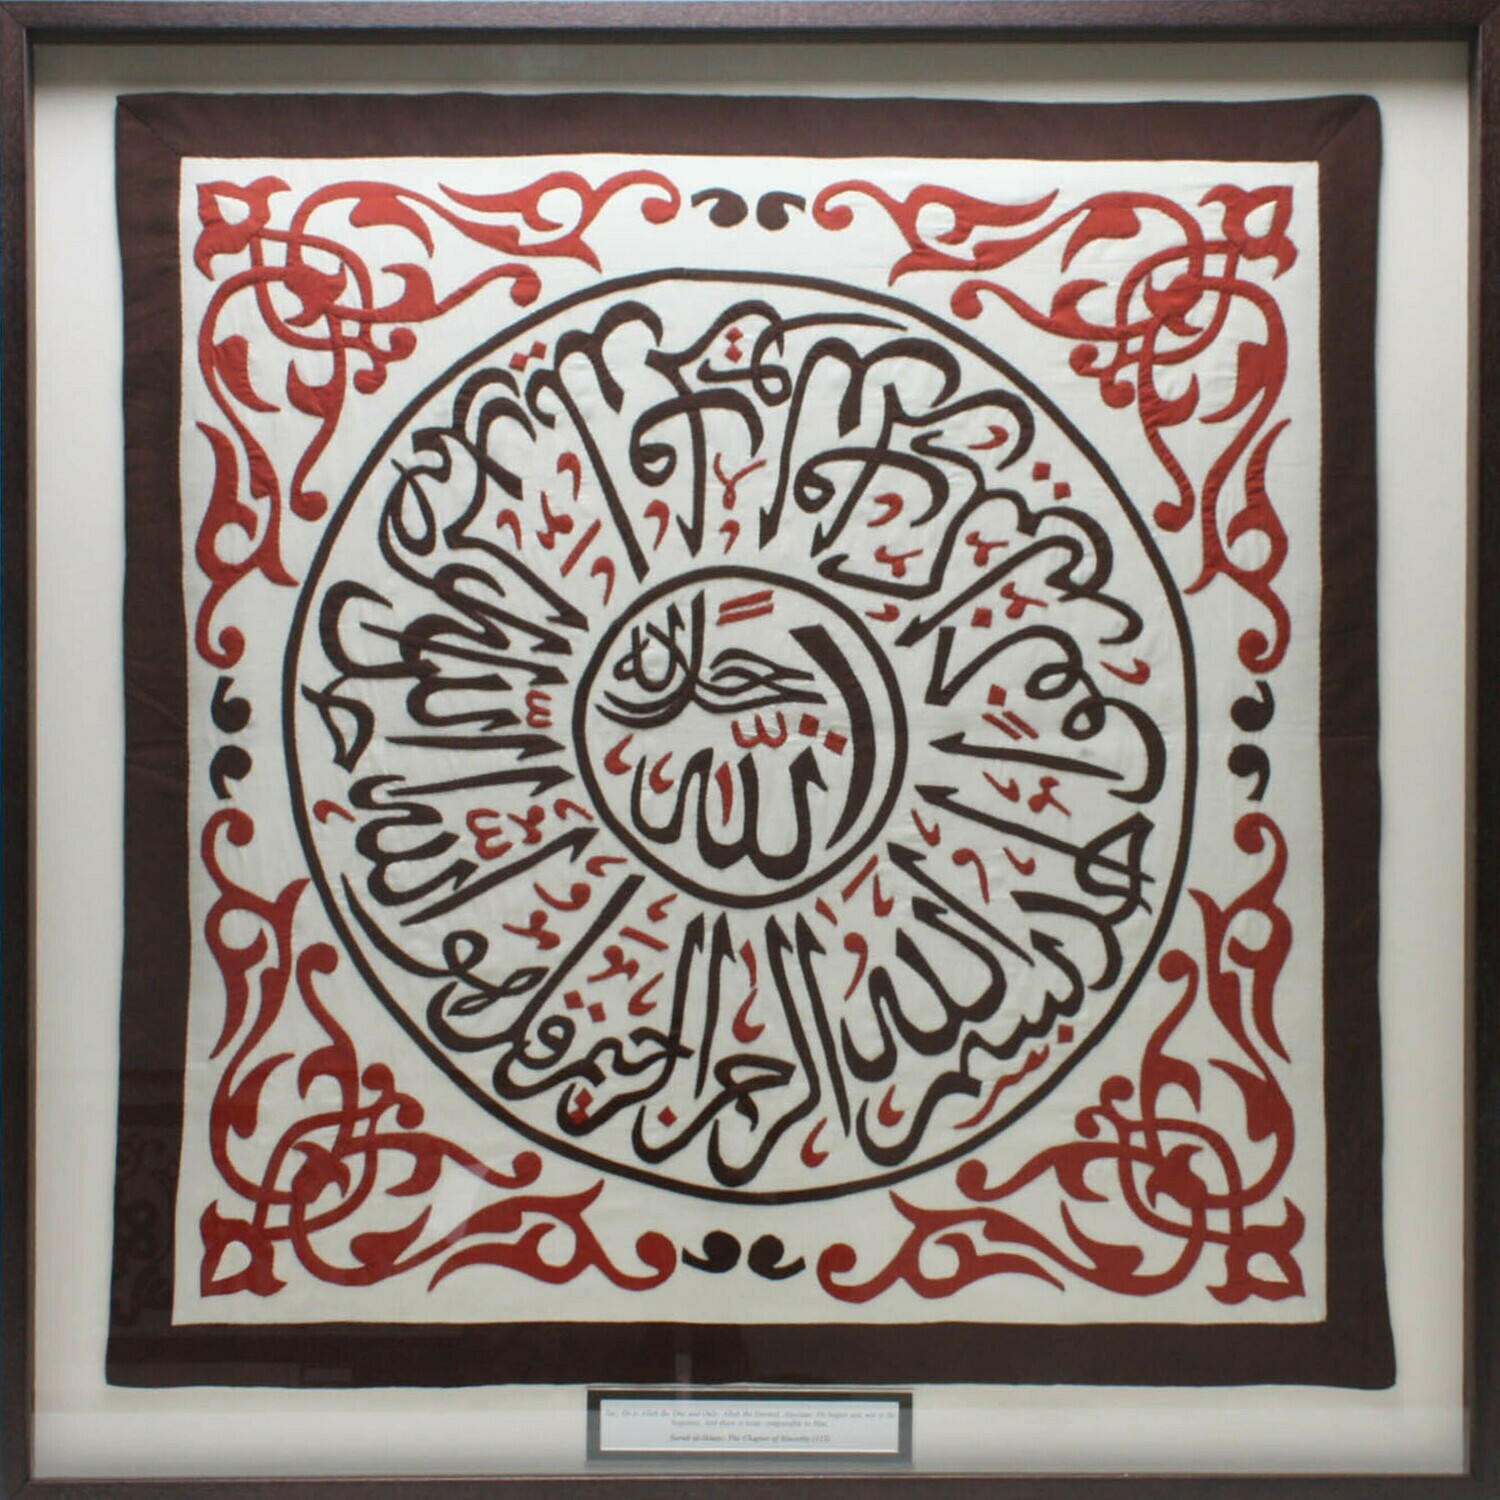 Surah Al-Ikhlas Rust Thuluth Calligraphy Hand-Stitched Appliqué Mount Black Museum Frame